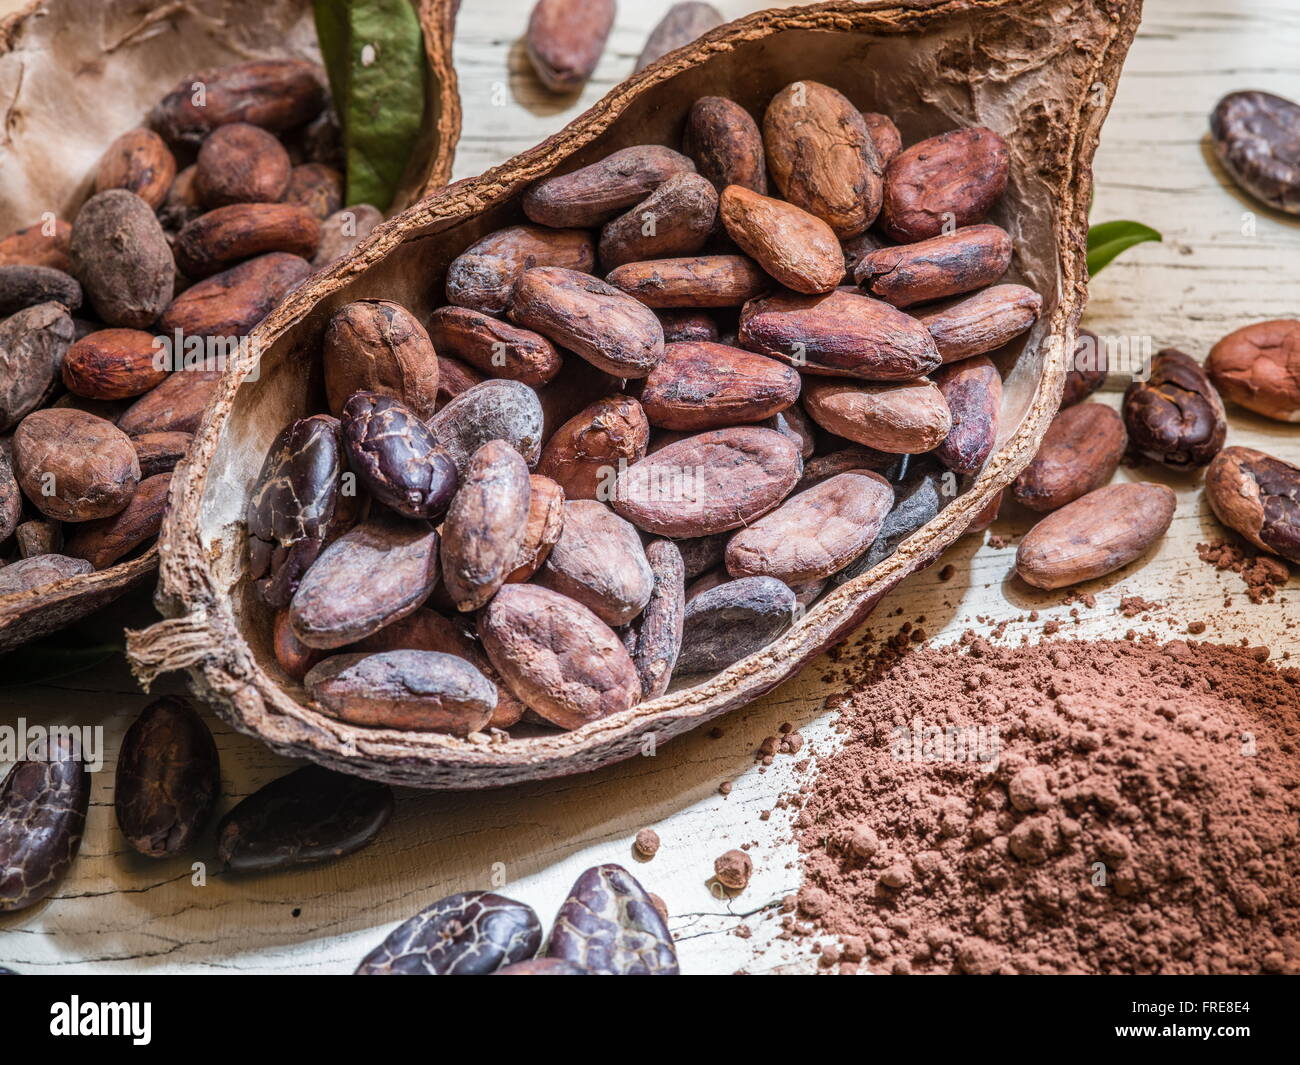 Cocoa powder and cocoa beans on the wooden table. Stock Photo